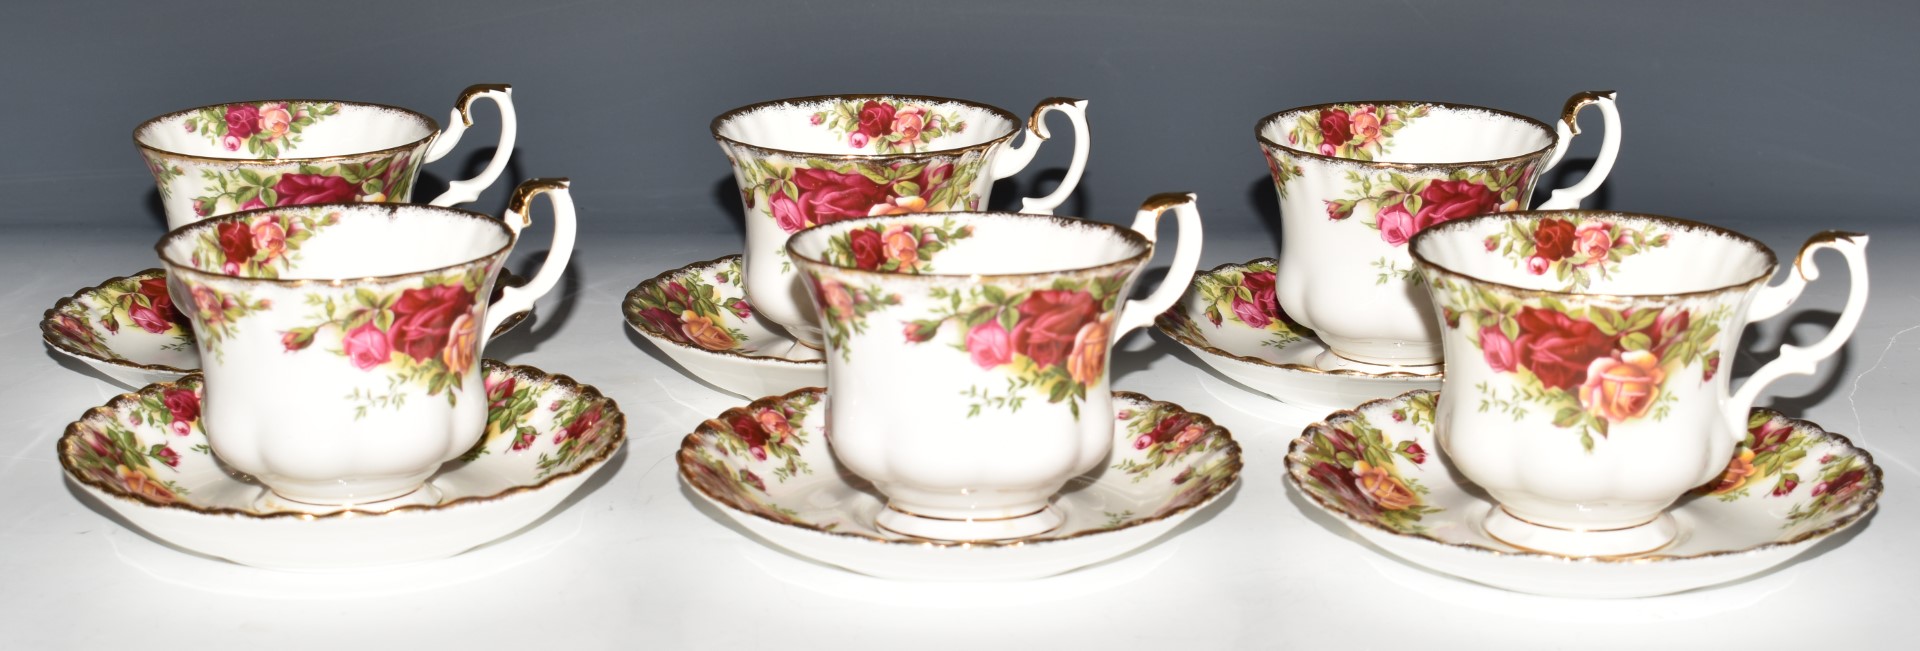 Approximately twenty two pieces of Royal Albert Old Country Roses teaware including two teapots, - Image 3 of 4